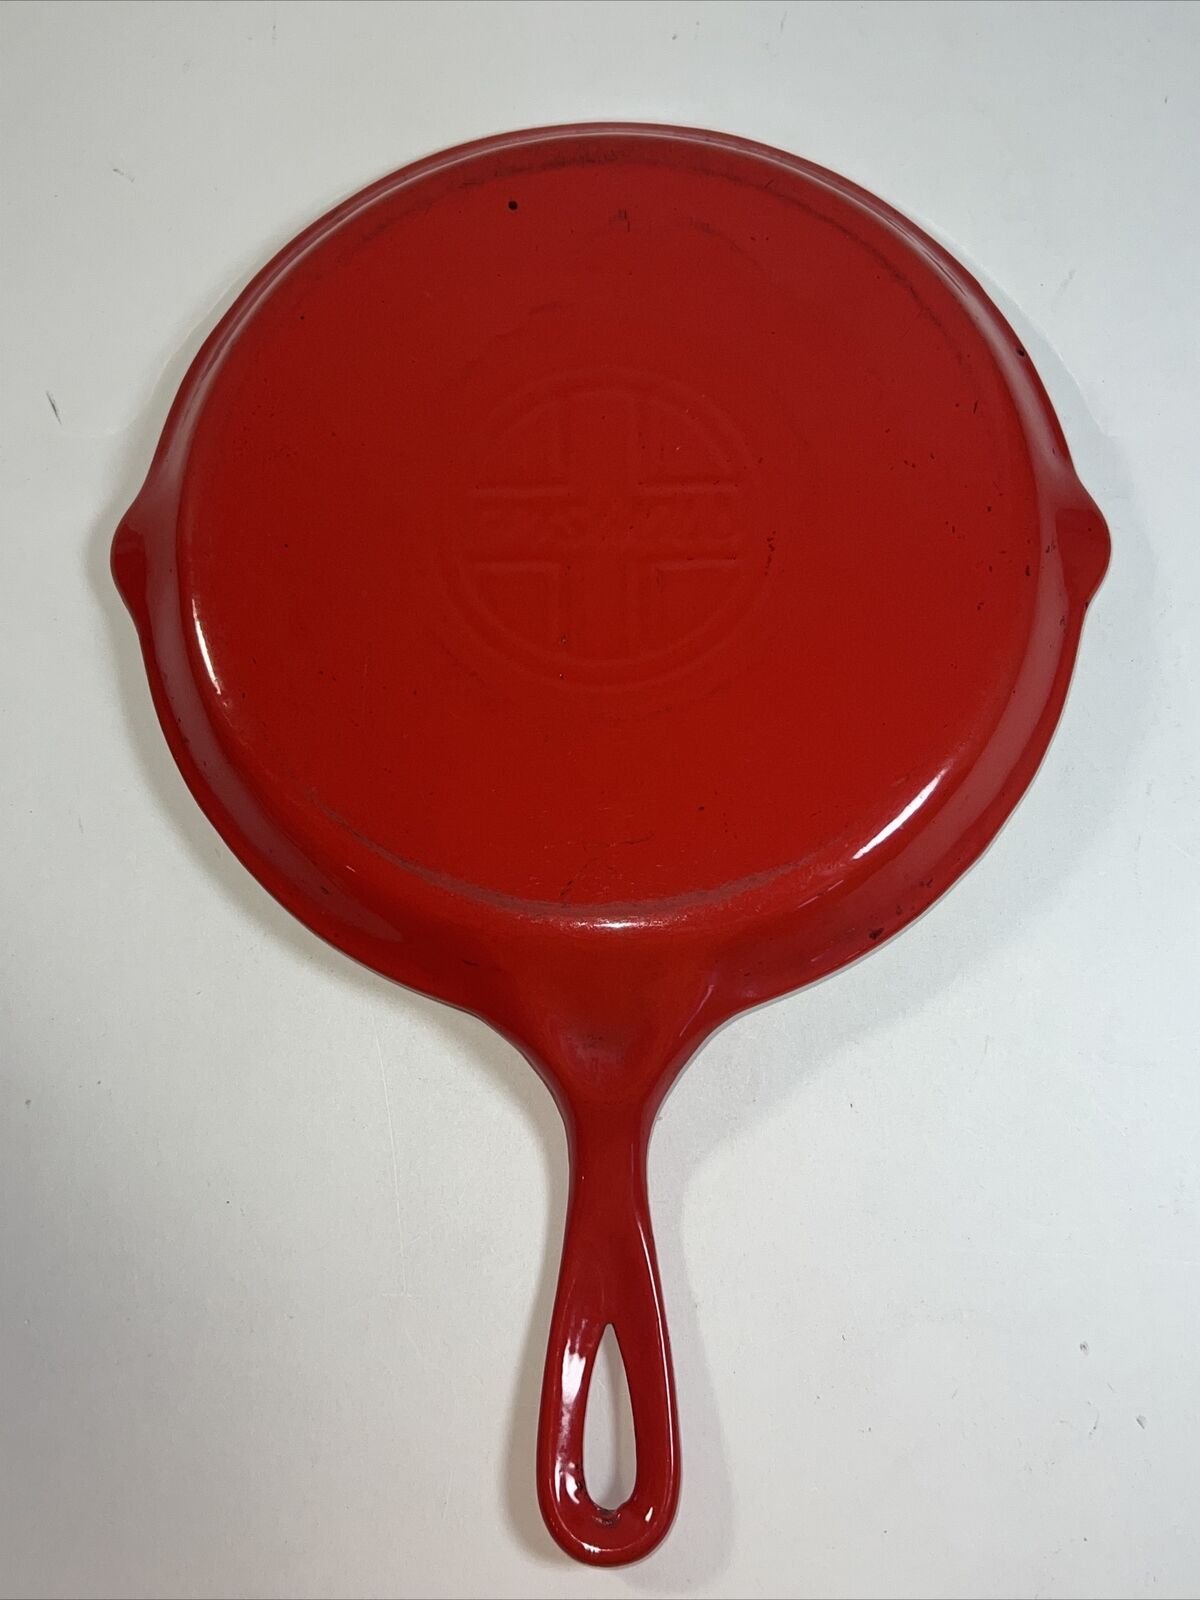 Griswold Cast Iron 107 Skillet Griddle with Red and White Enamel